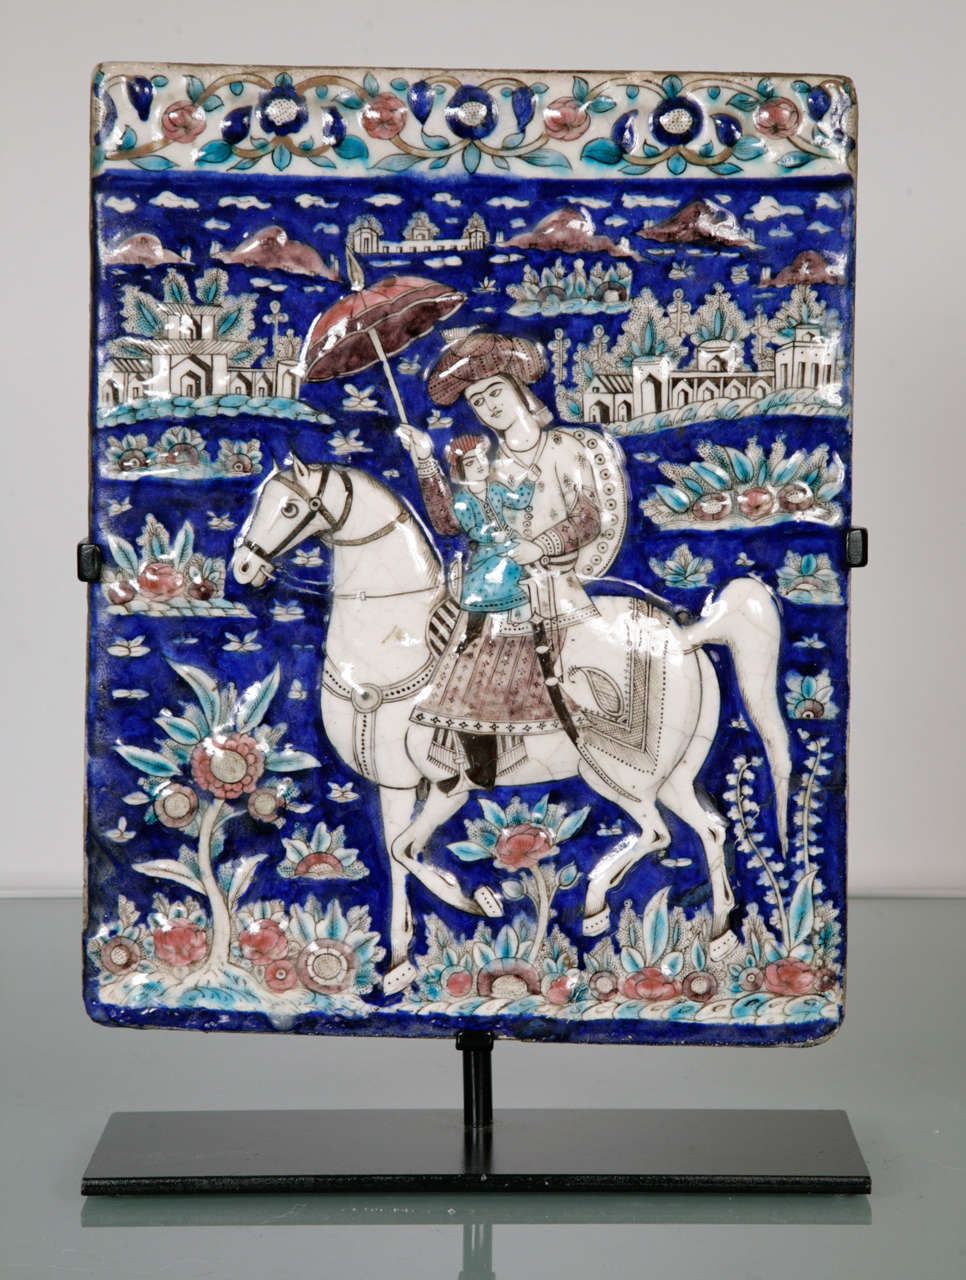 A rectangular polychrome tile depicting an equestrian figure holding a parasol and carrying a child. The background on cobalt blue with decorative border and landscape throughout.